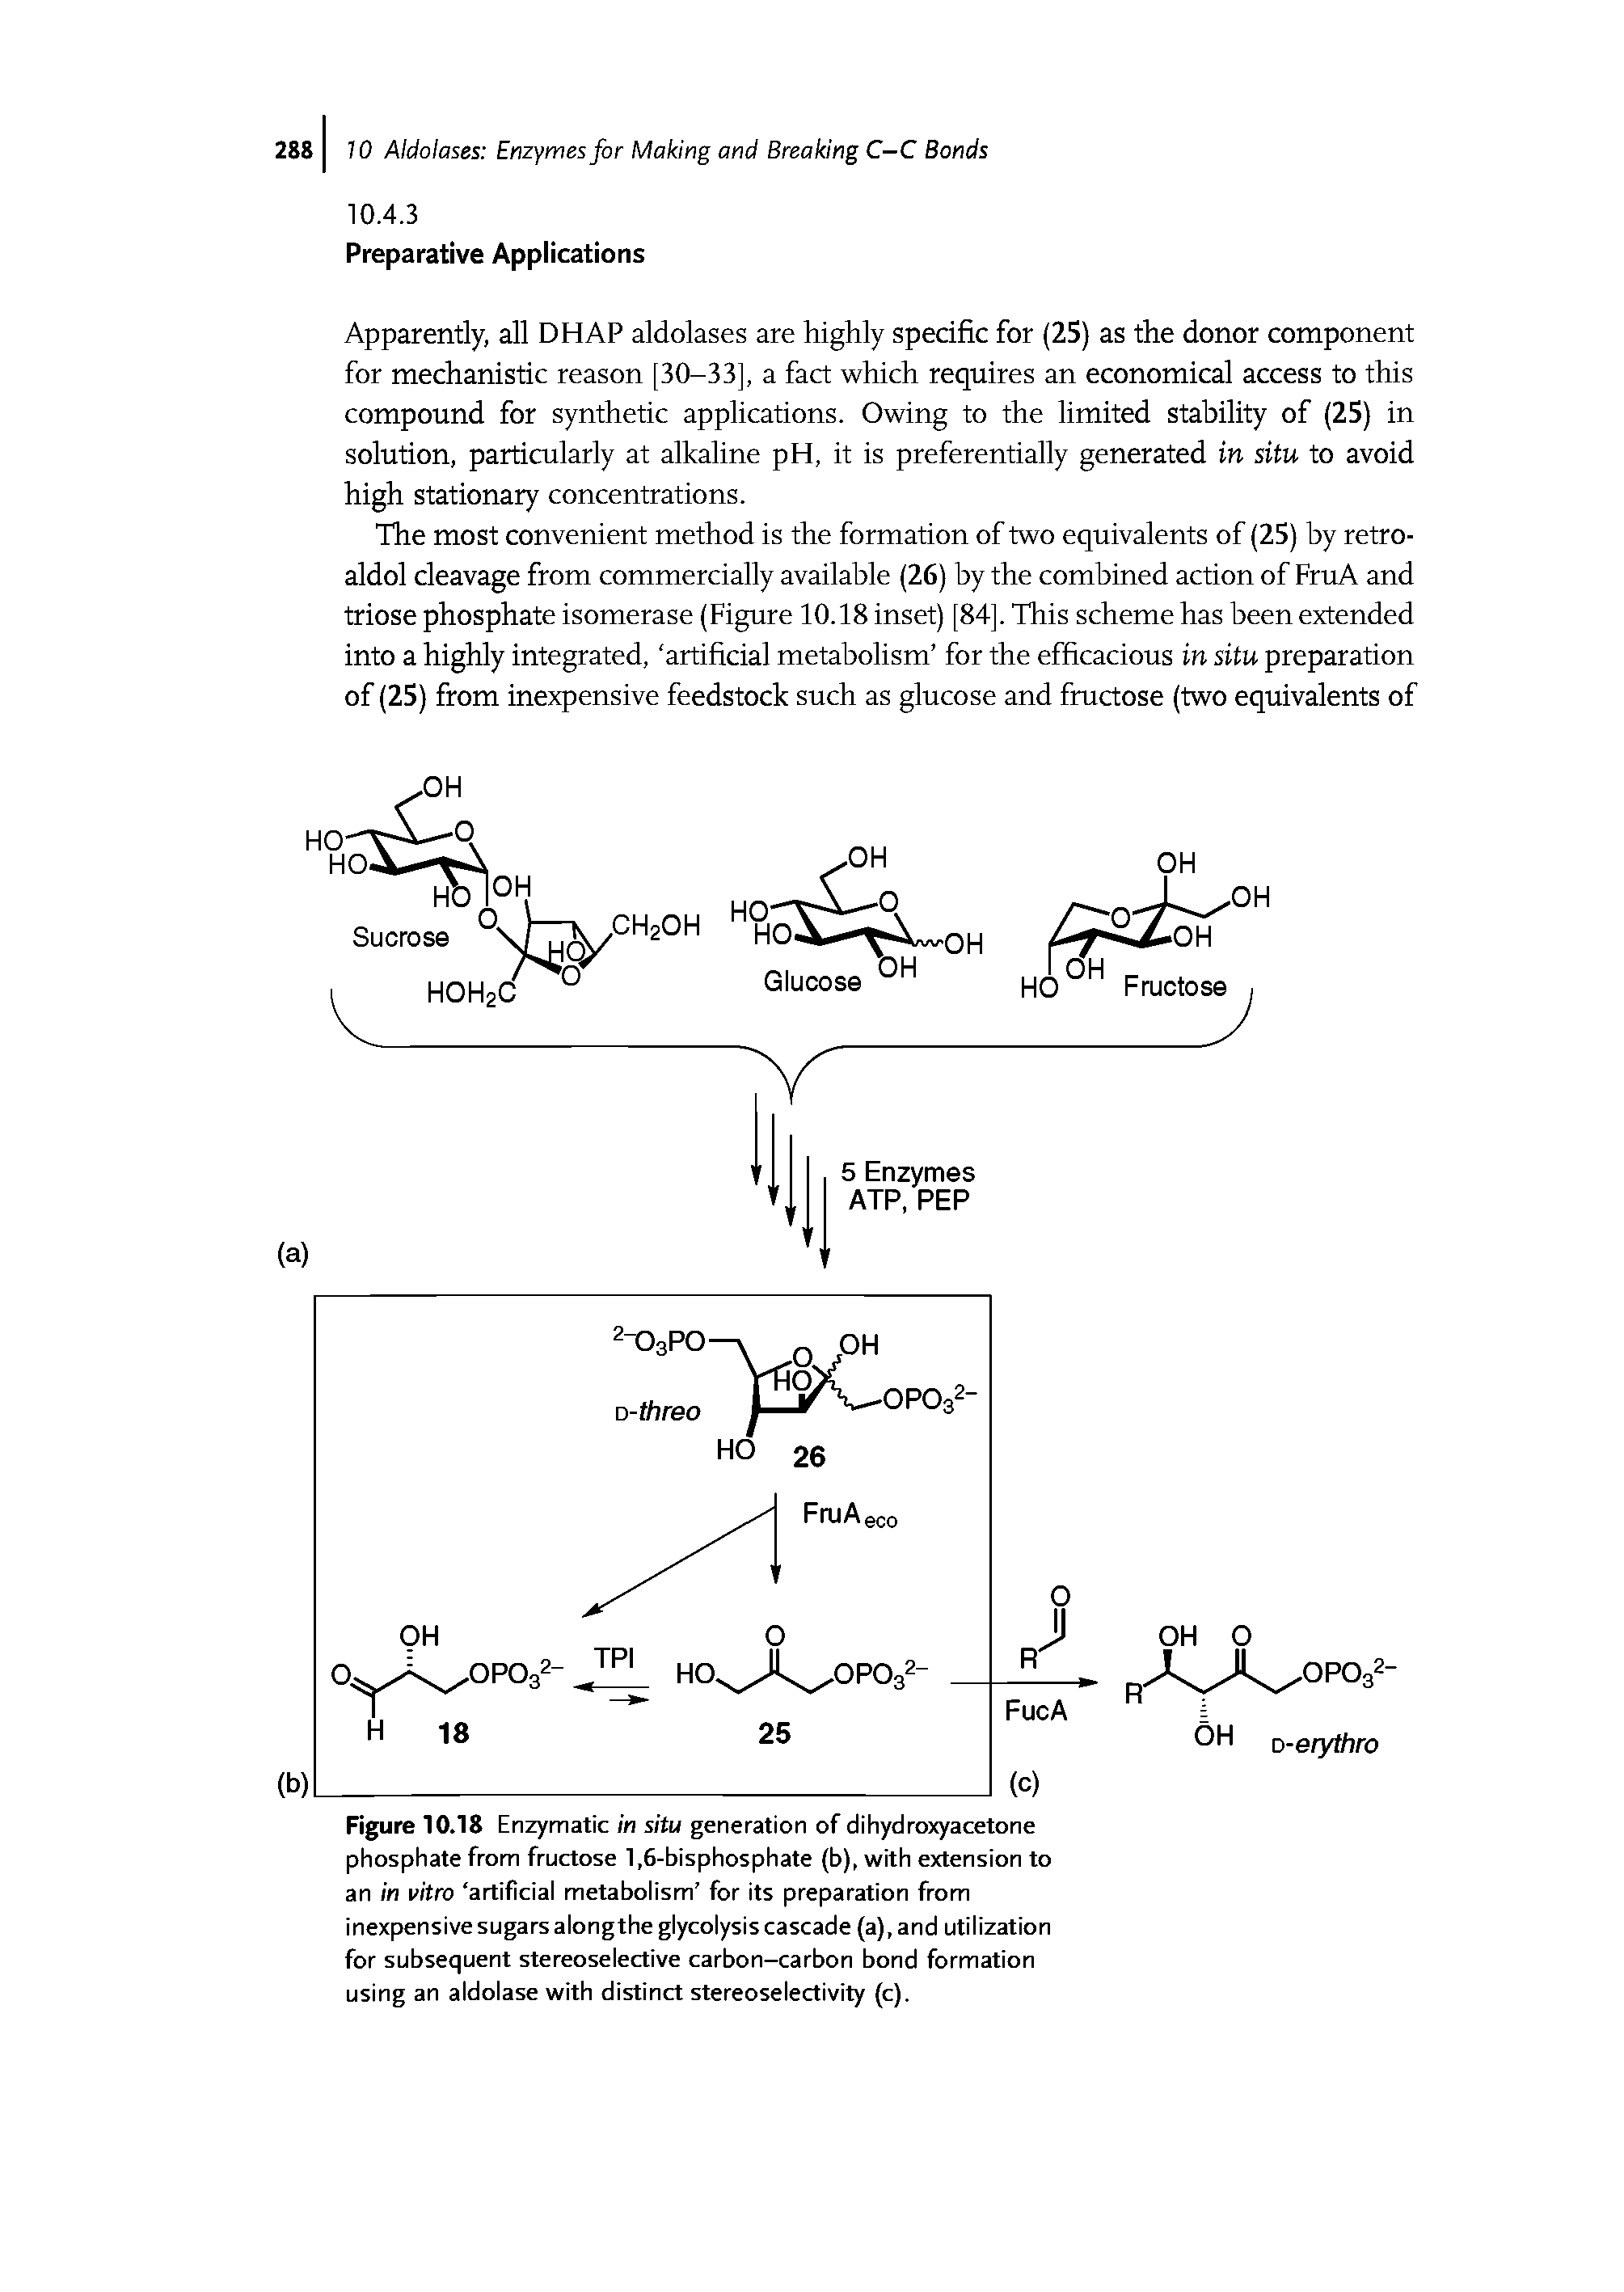 Figure 10.18 Enzymatic in situ generation of dihydroxyacetone phosphate from fructose 1,6-bisphosphate (b), with extension to an in vitro artificial metabolism for its preparation from inexpensive sugars alongthe glycolysis cascade (a), and utilization for subsequent stereoselective carbon-carbon bond formation using an aldolase with distinct stereoselectivity (c).